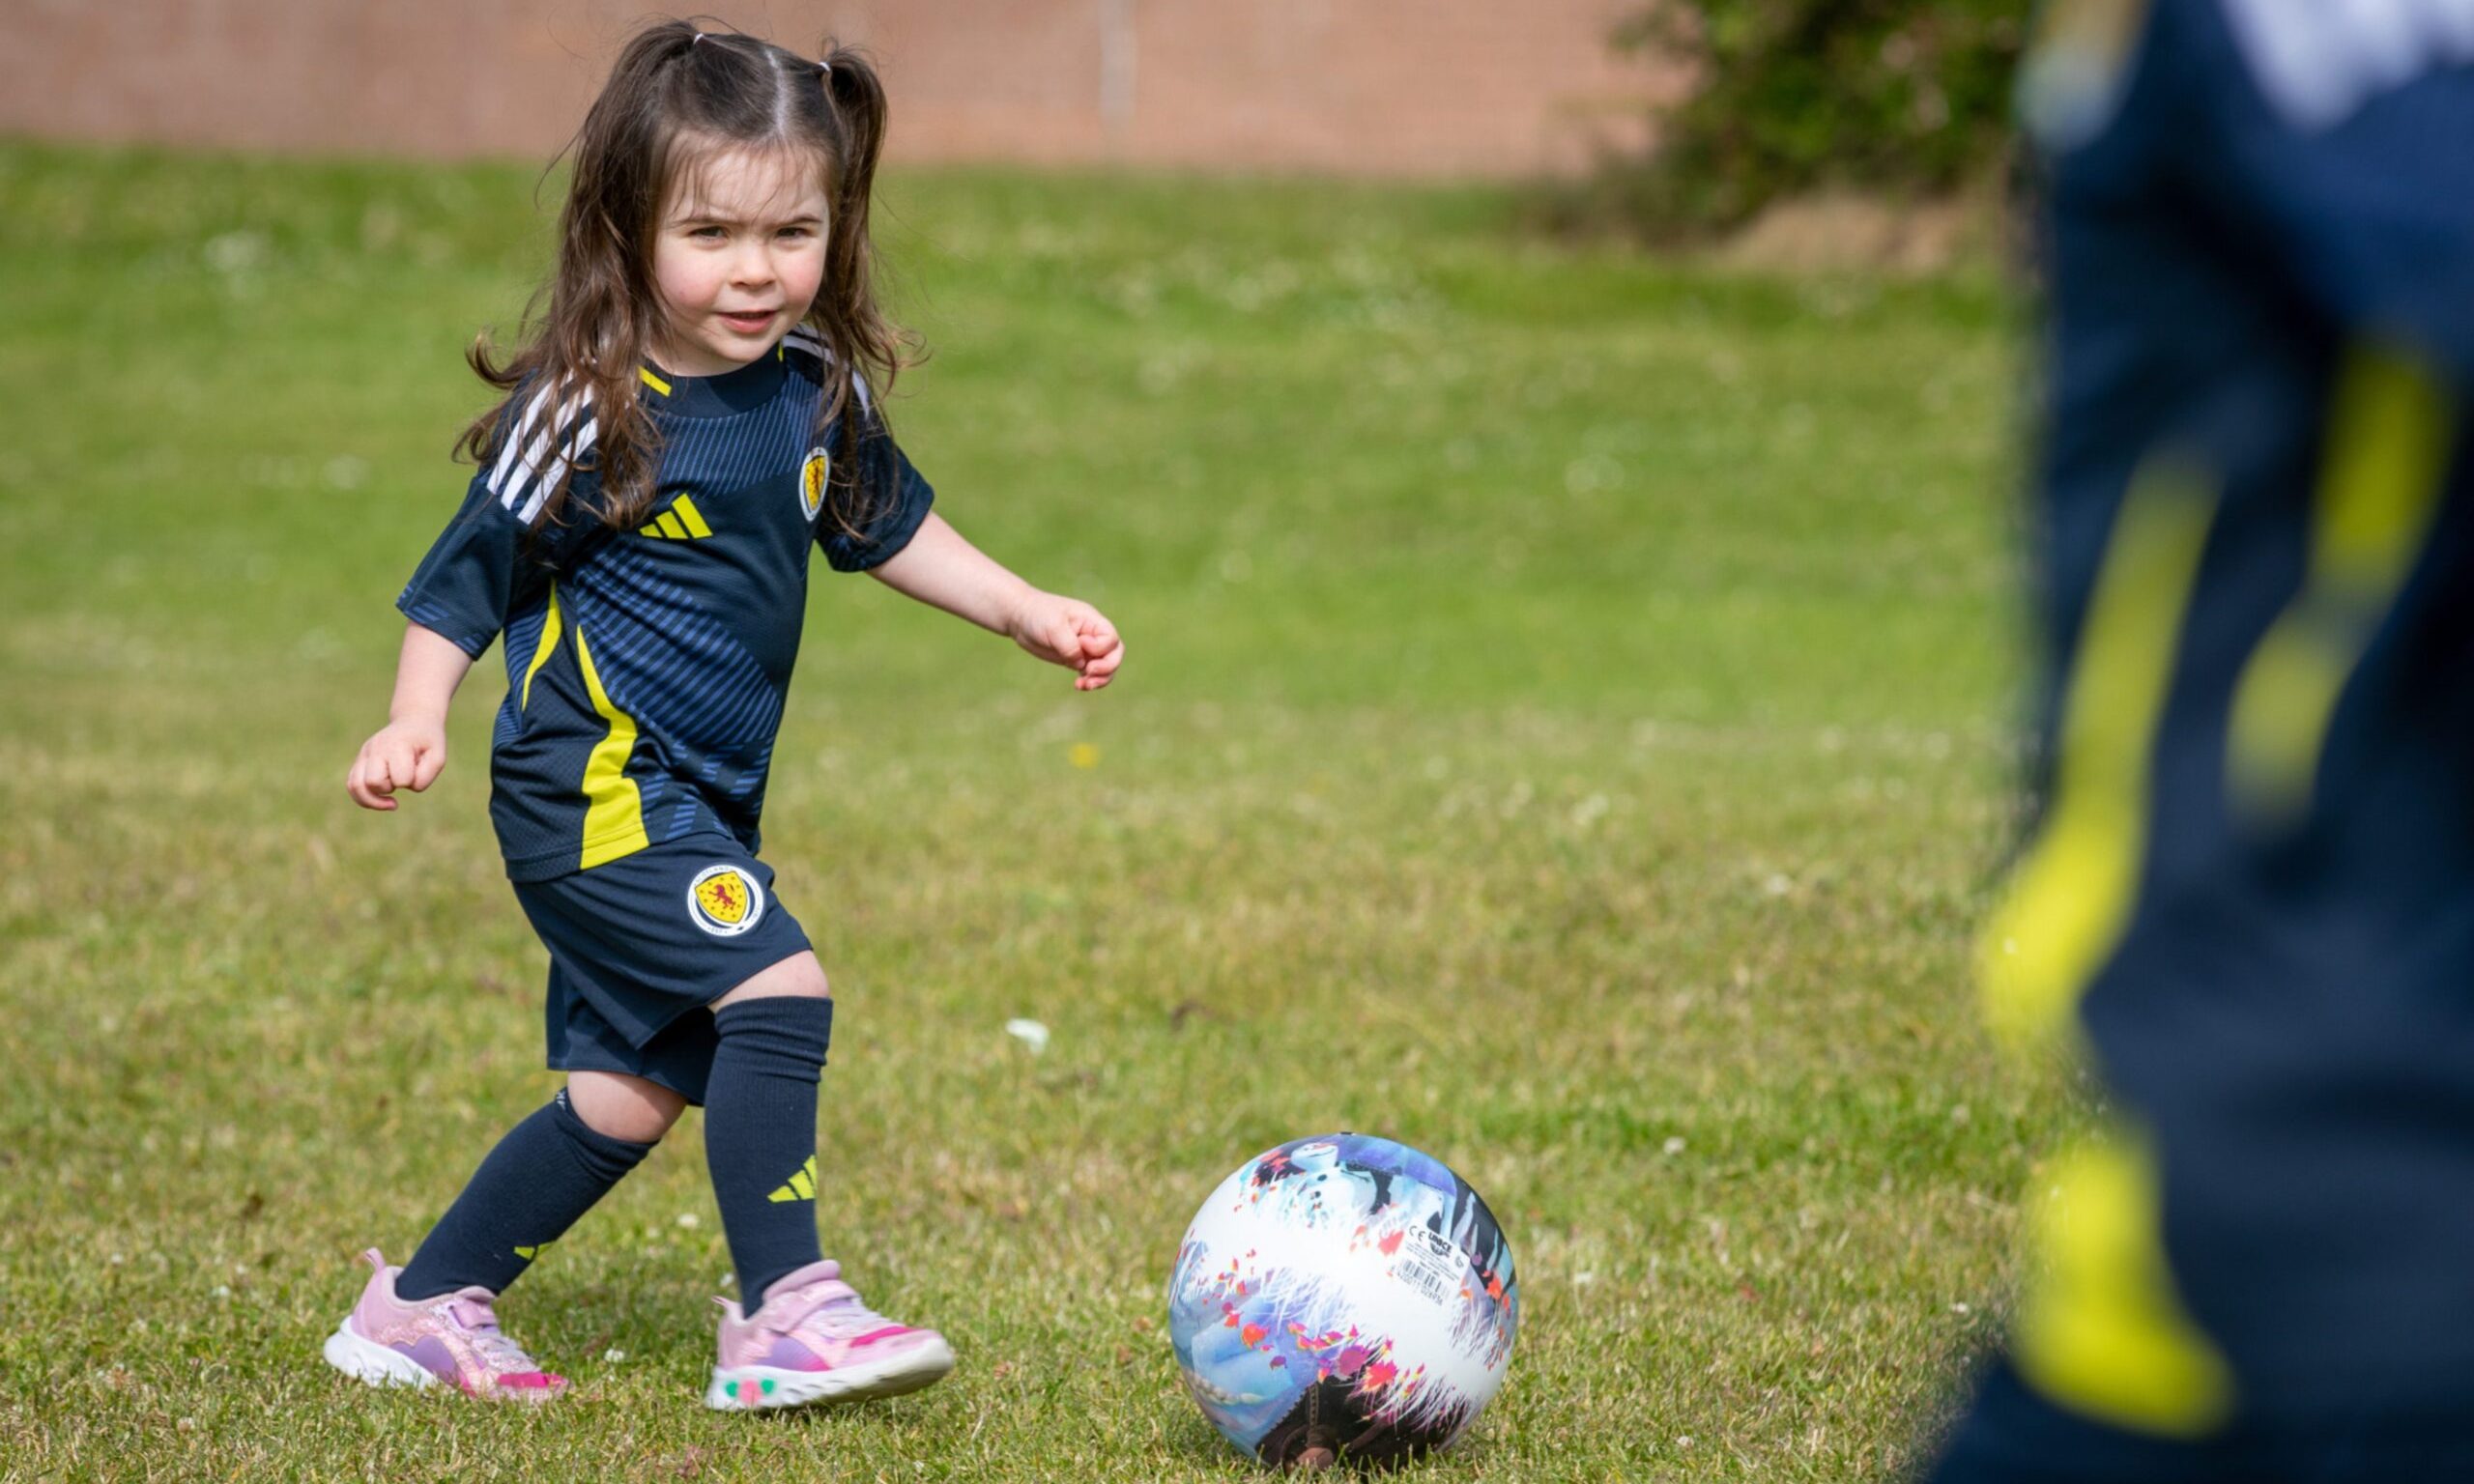 Azzurra loves football and is showing early talent for the game. Image: Steve Brown/DC Thomson.